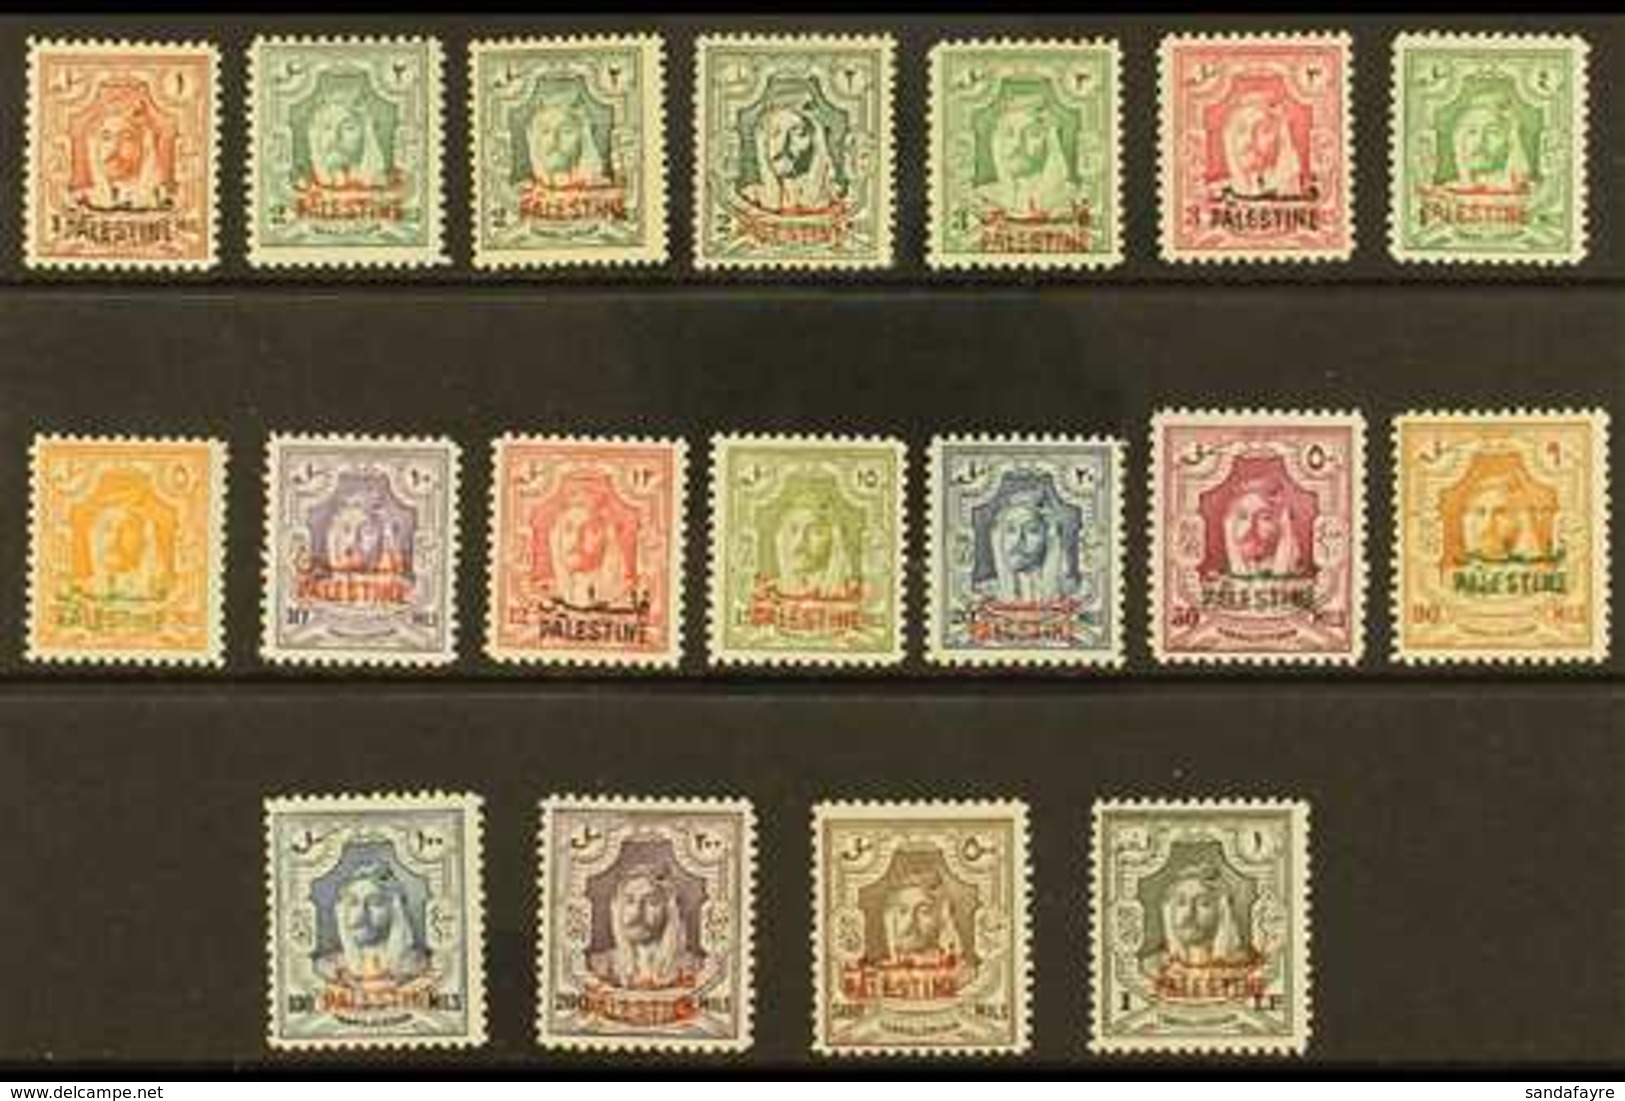 JORDANIAN OCCUPATION 1948 Overprints Complete Set Incl All Three Perf Types Of 2m, SG P1/16 & P2c/d, Very Fine Mint, Ver - Palestine